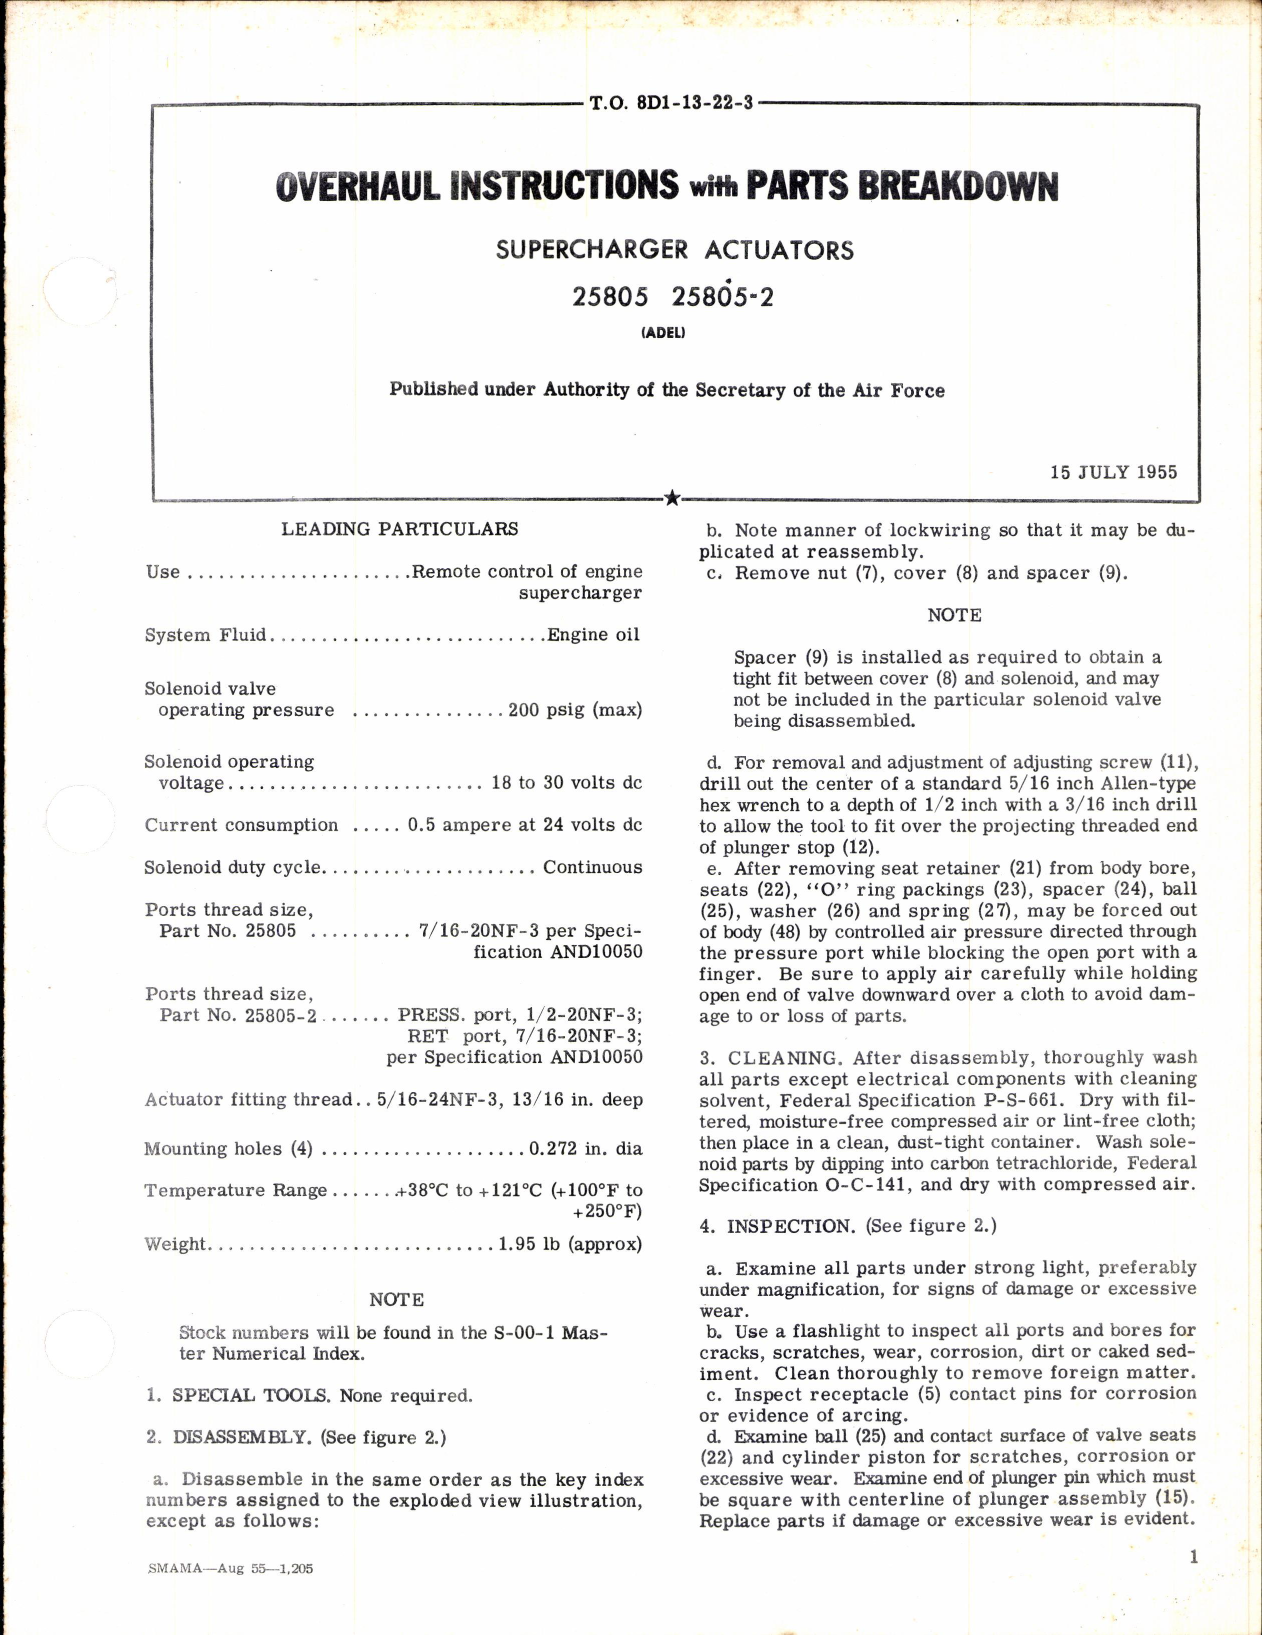 Sample page 1 from AirCorps Library document: Superchargher Actuators 25805 and 25805-2